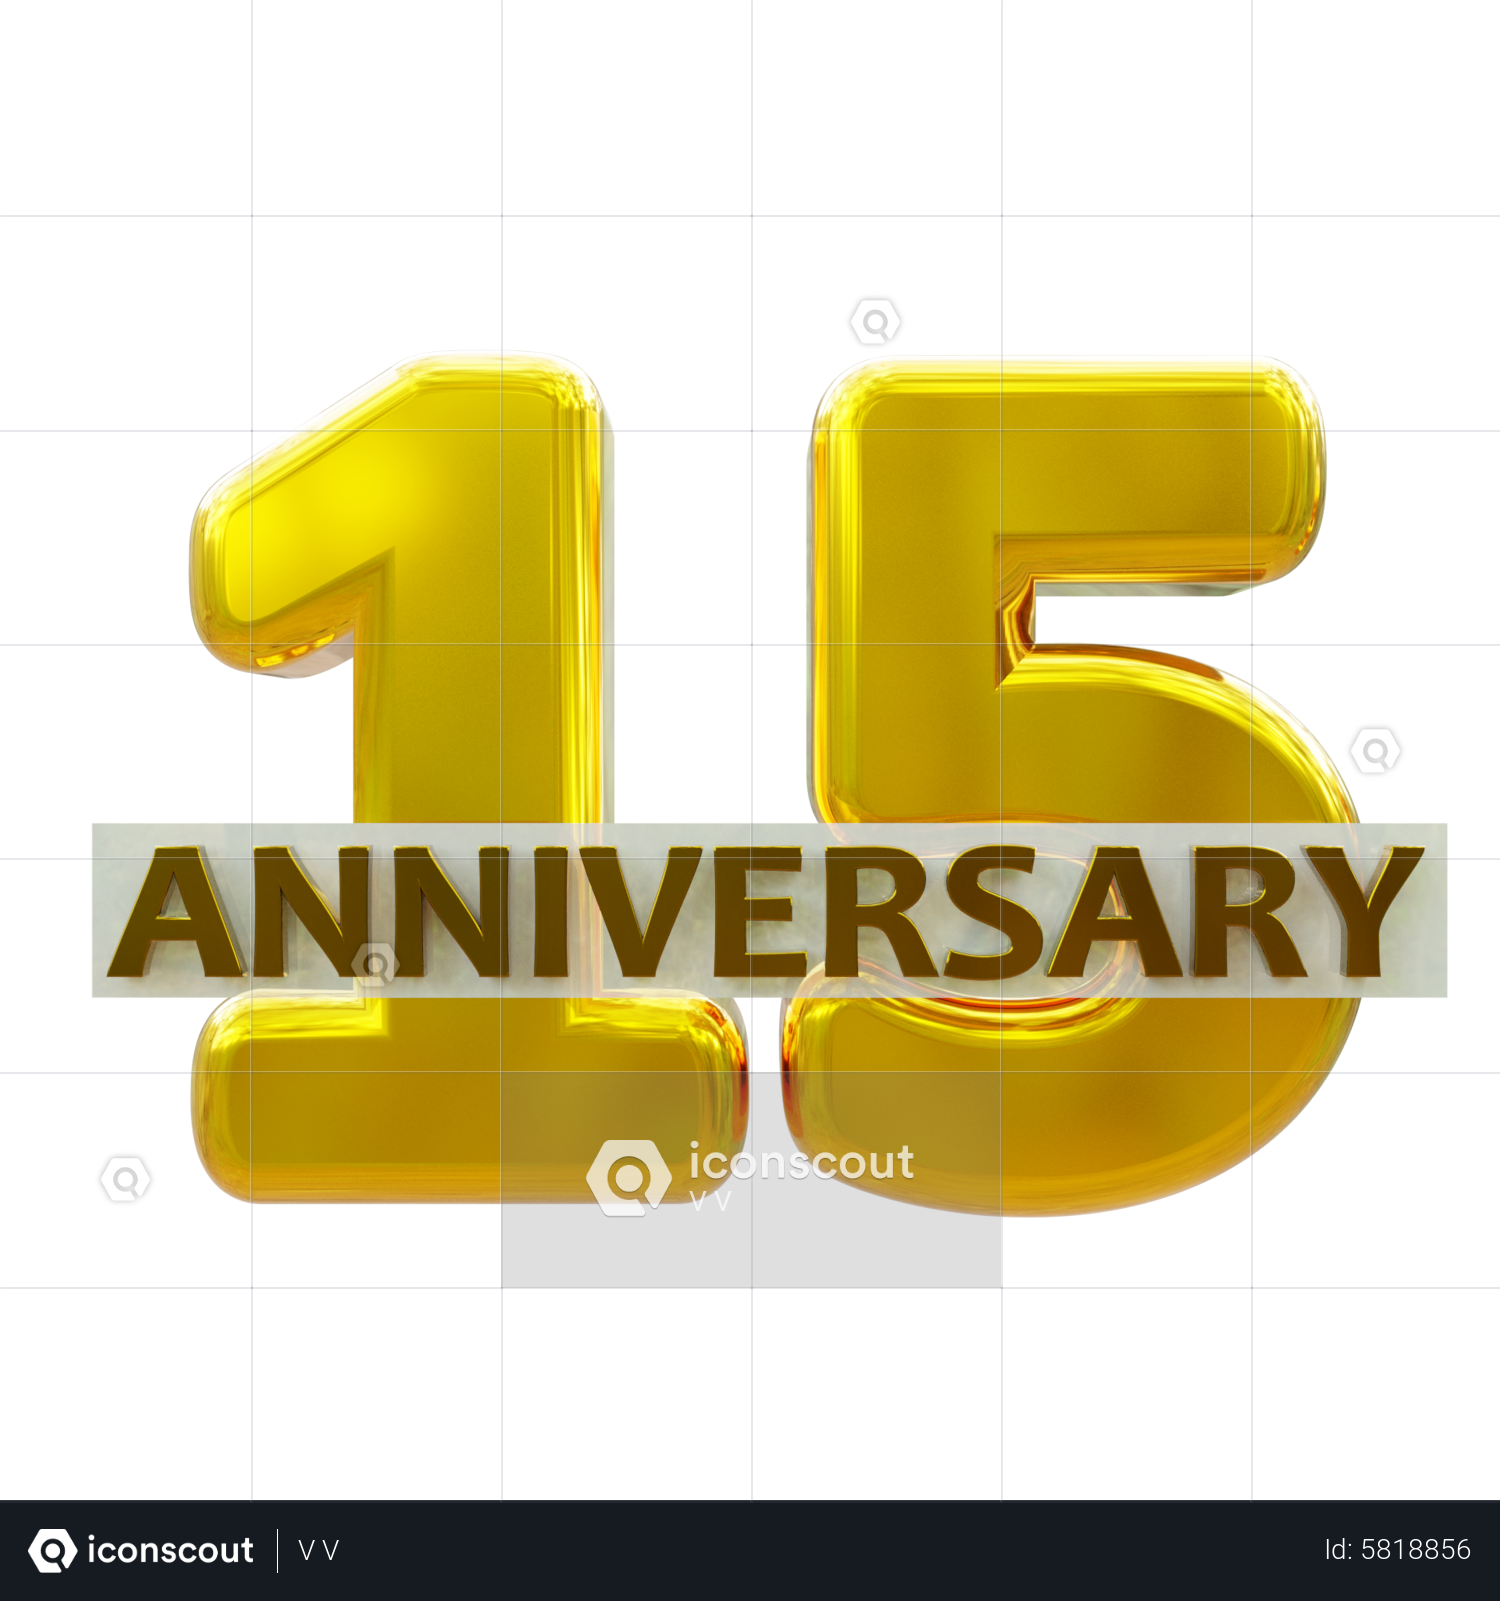 15 Years Anniversary Vector Design Images, 15 Years Anniversary Celebration  Vector Logo Design Template, Text, Seal, Clean PNG Image For Free Download